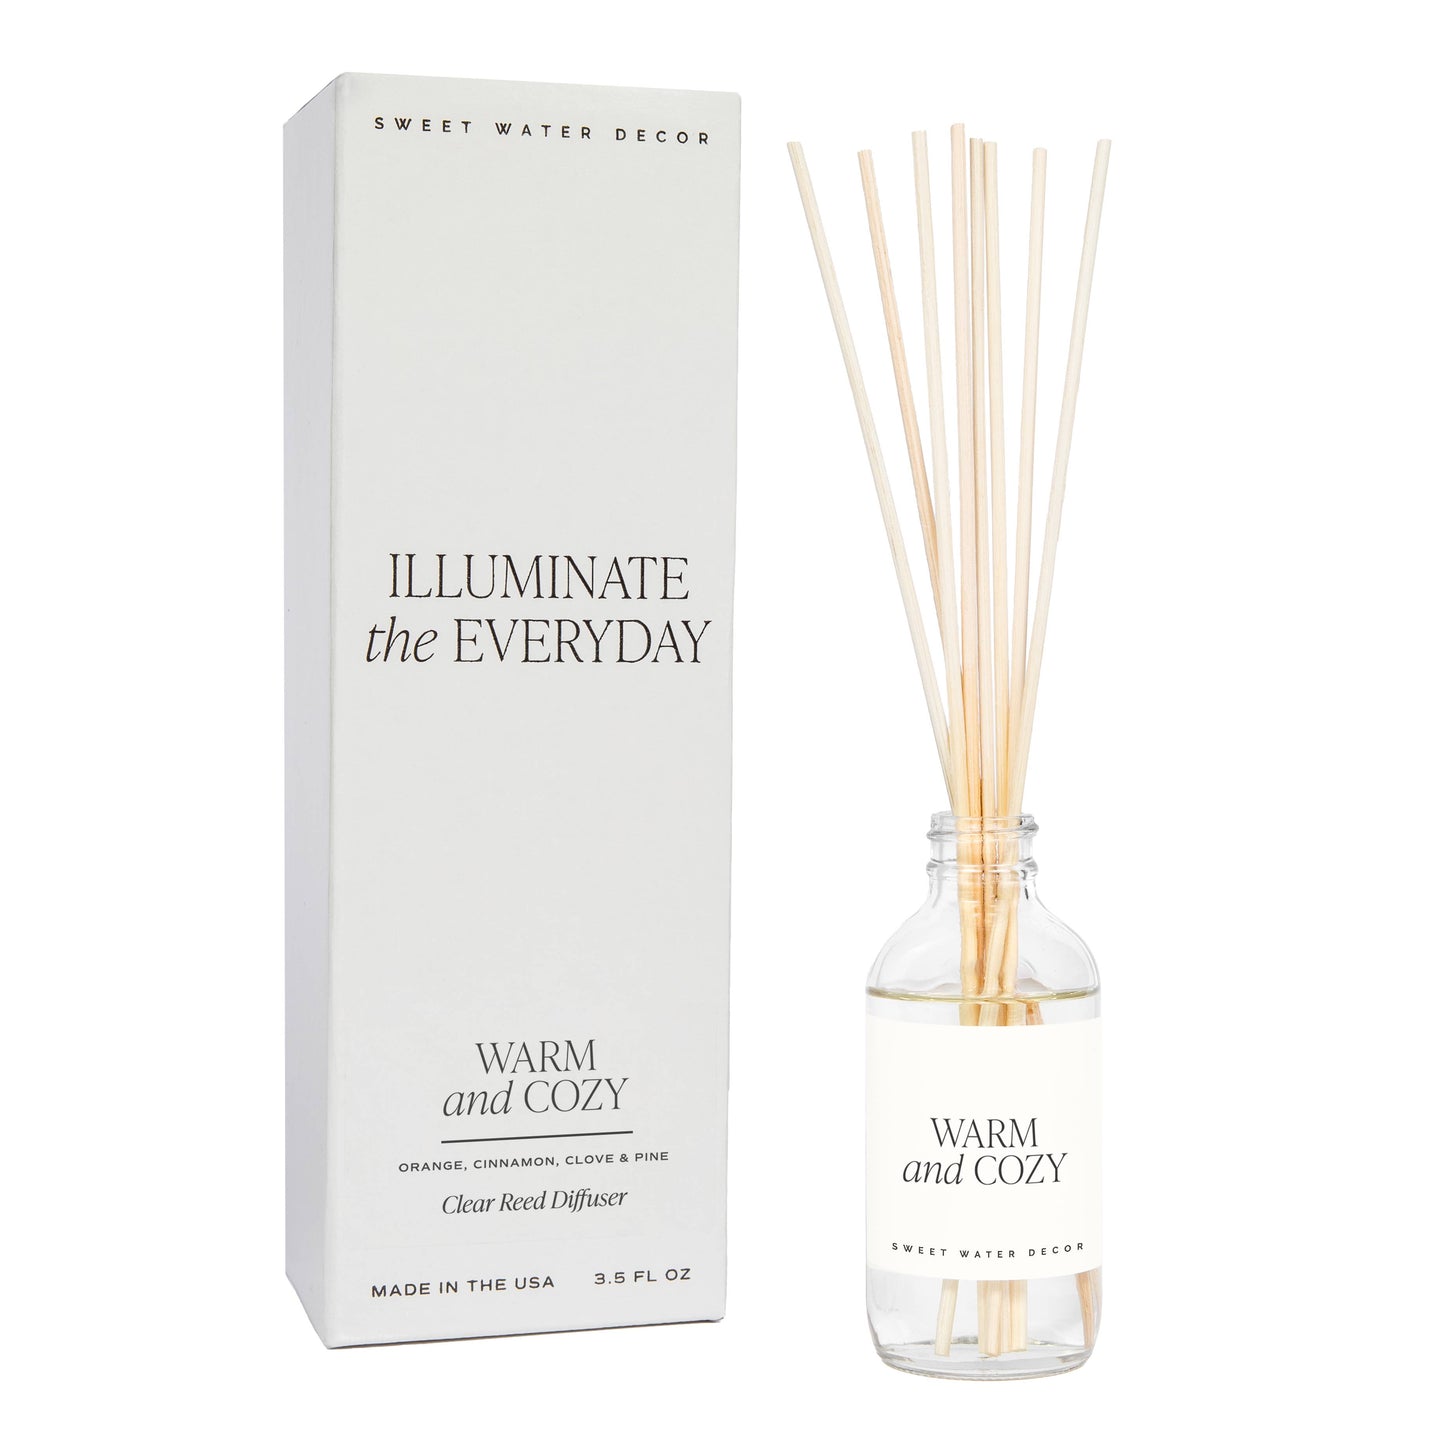 *NEW* Warm and Cozy Reed Diffuser